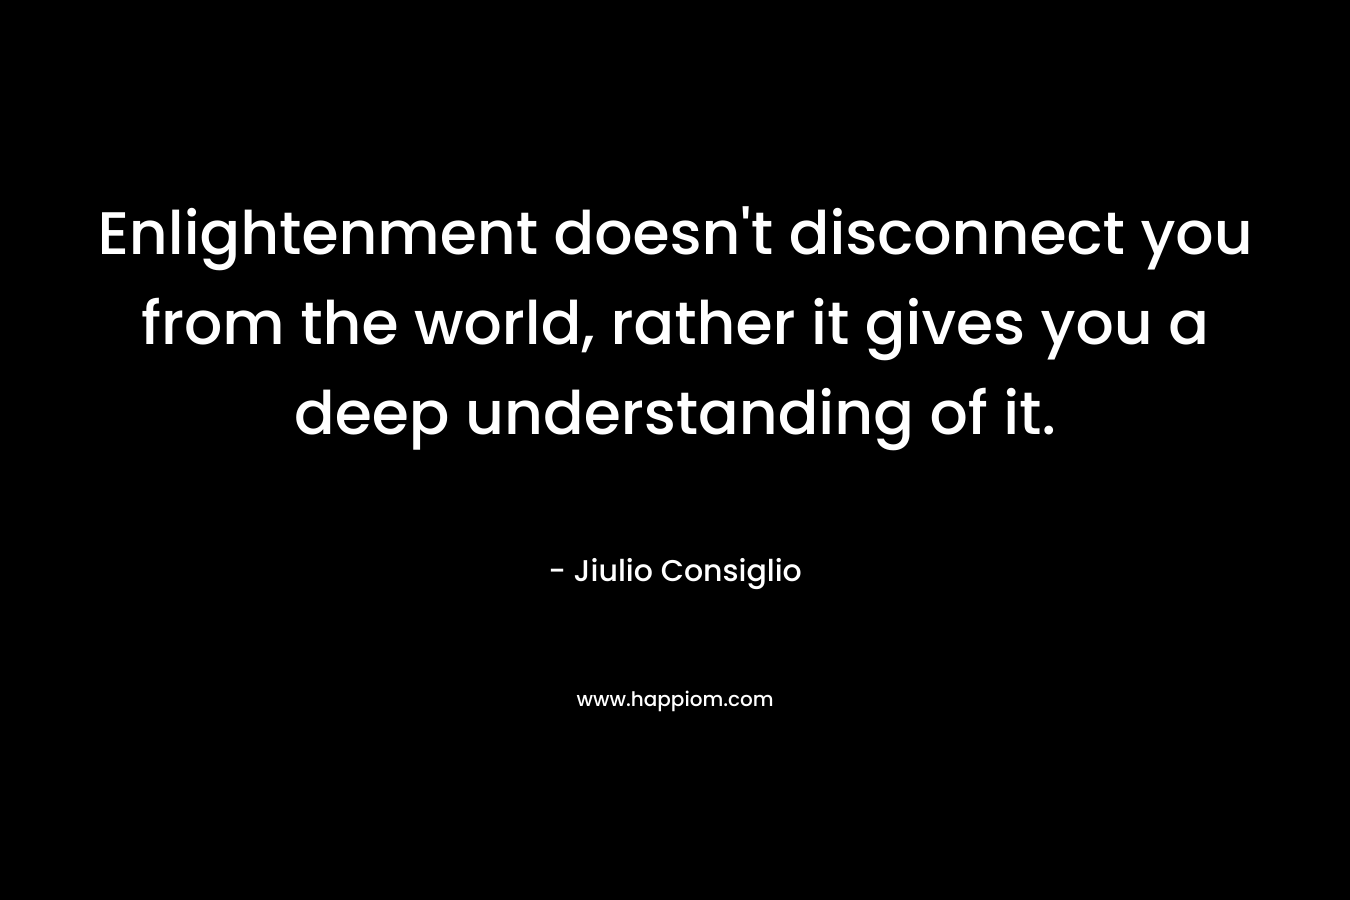 Enlightenment doesn't disconnect you from the world, rather it gives you a deep understanding of it.